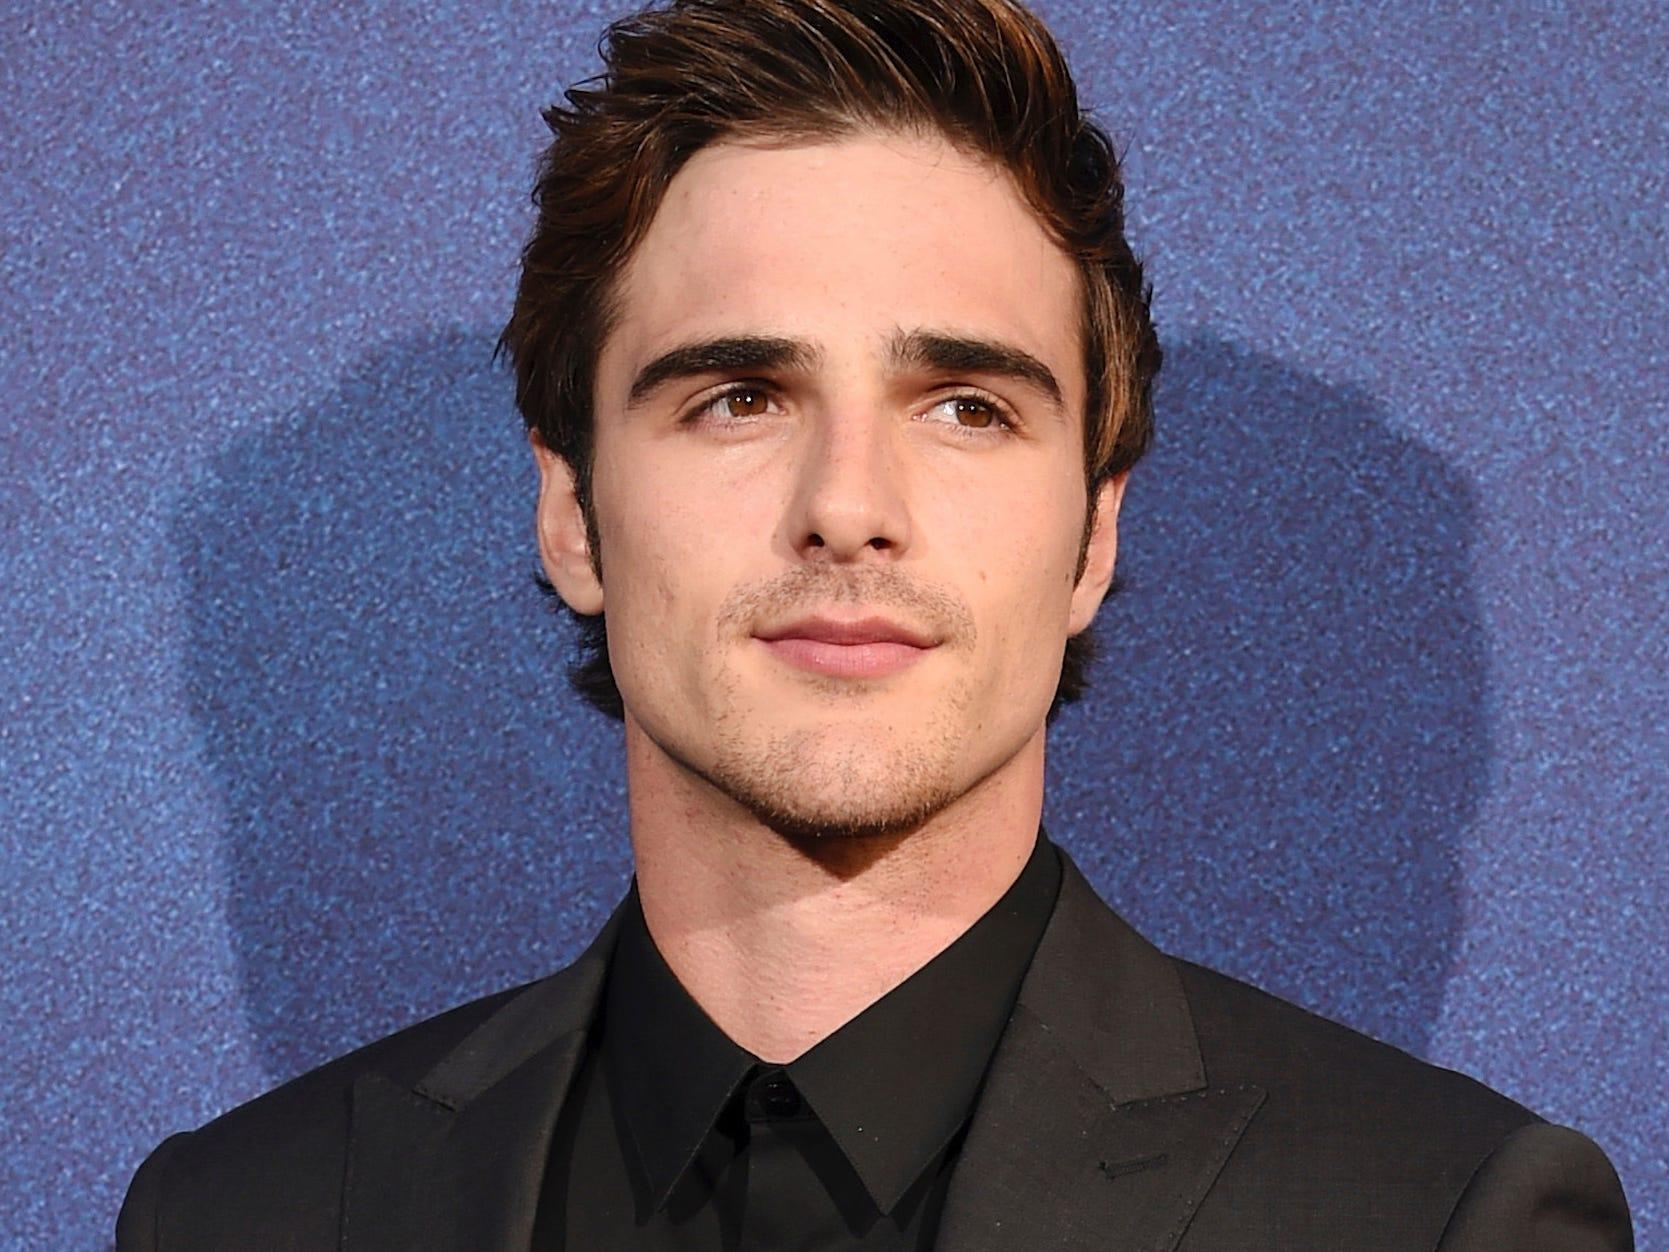 8 things you probably didn't know about Jacob Elordi | BusinessInsider ...